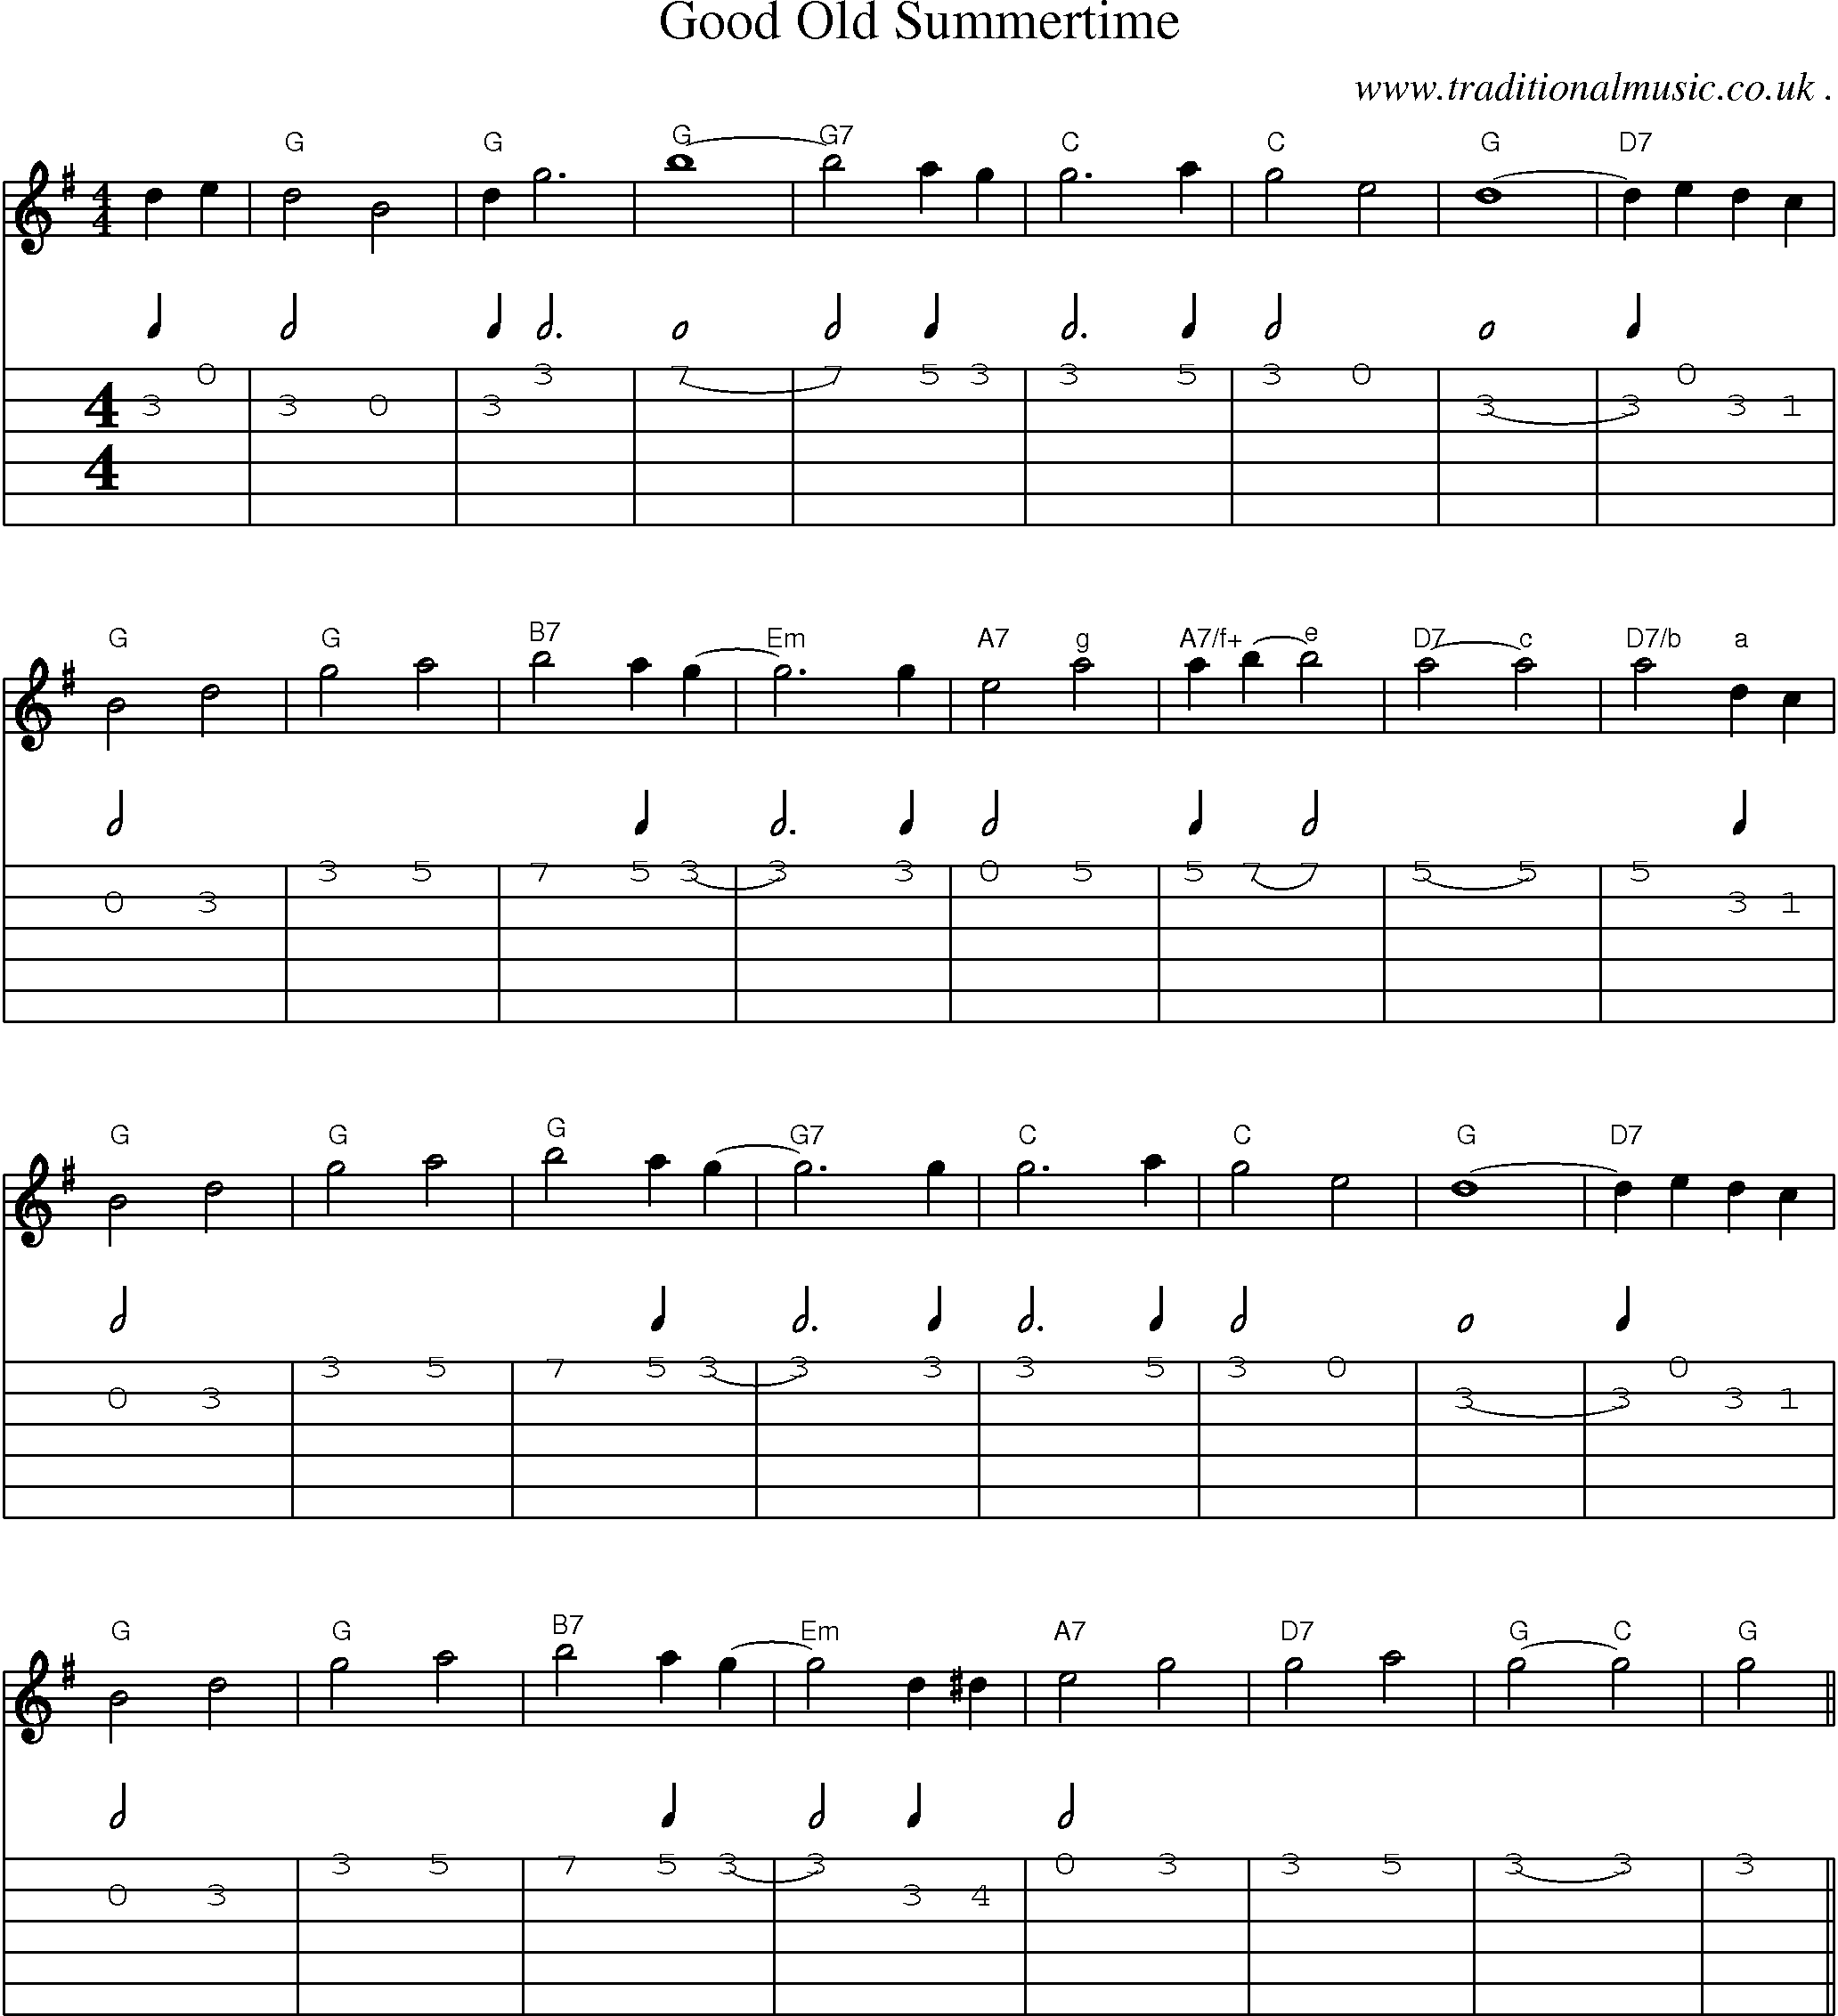 Music Score and Guitar Tabs for Good Old Summertime